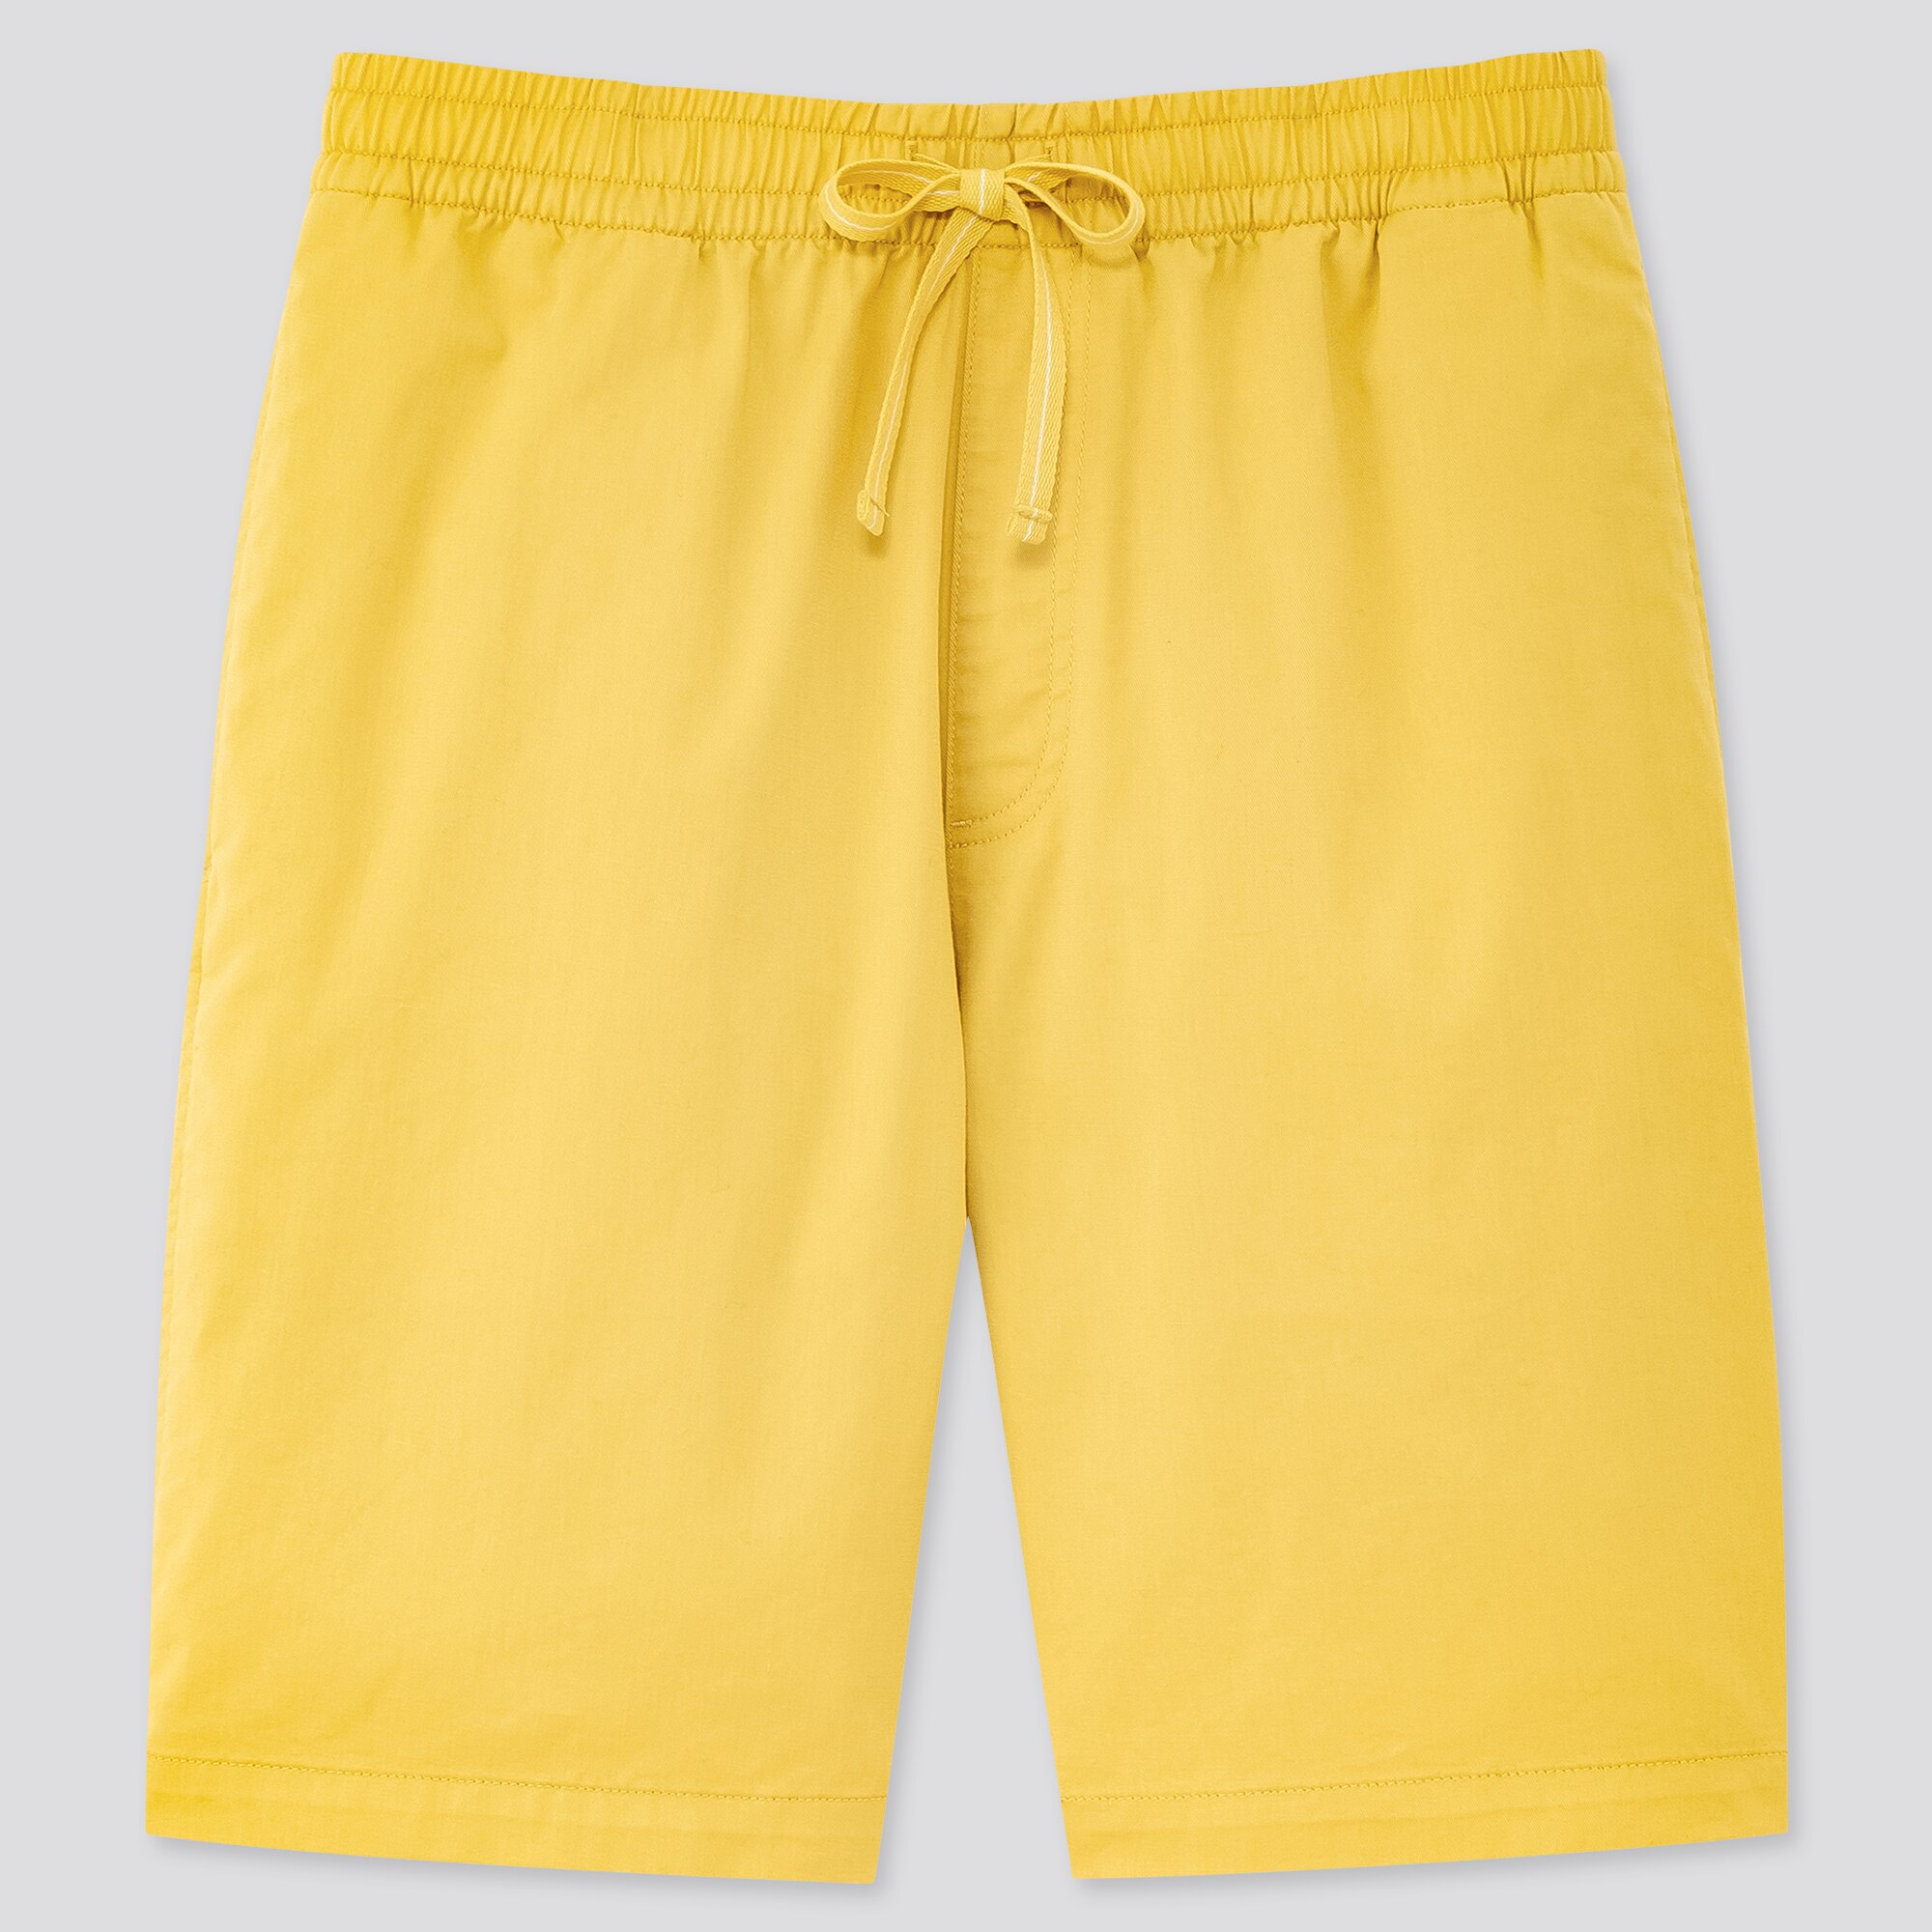 Uniqlo Philippines  Whats the reason to go to a UNIQLO near you Mens  Denim Shorts P690 save P300 regular price P990 Stay cool and casual in  UNIQLOs denim shorts Available in